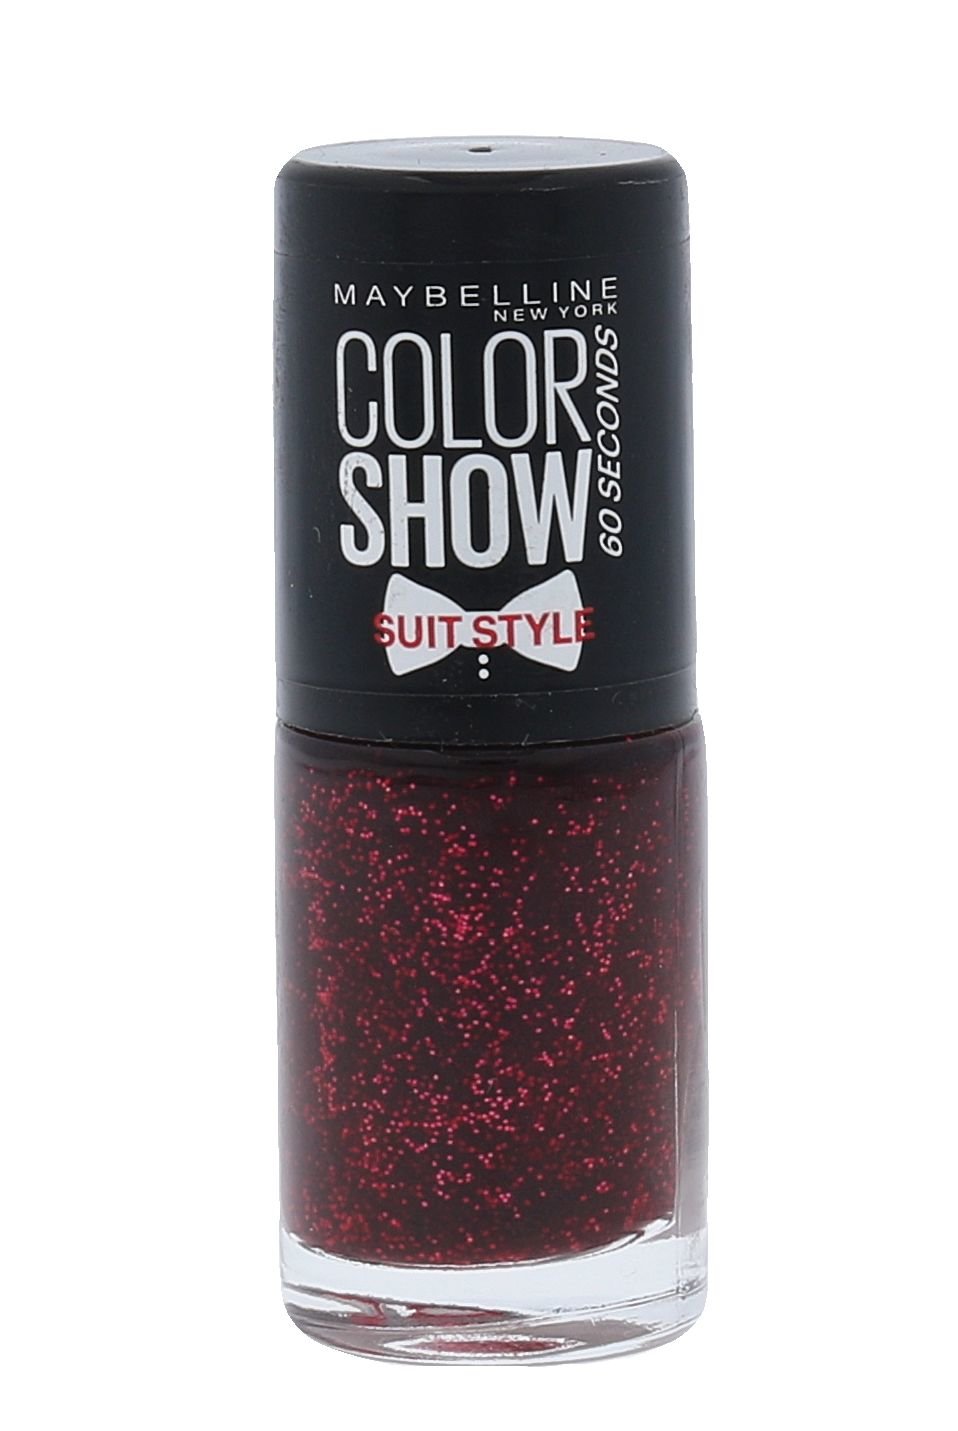 Maybelline Color Show Suit Style 7ml nagų lakas